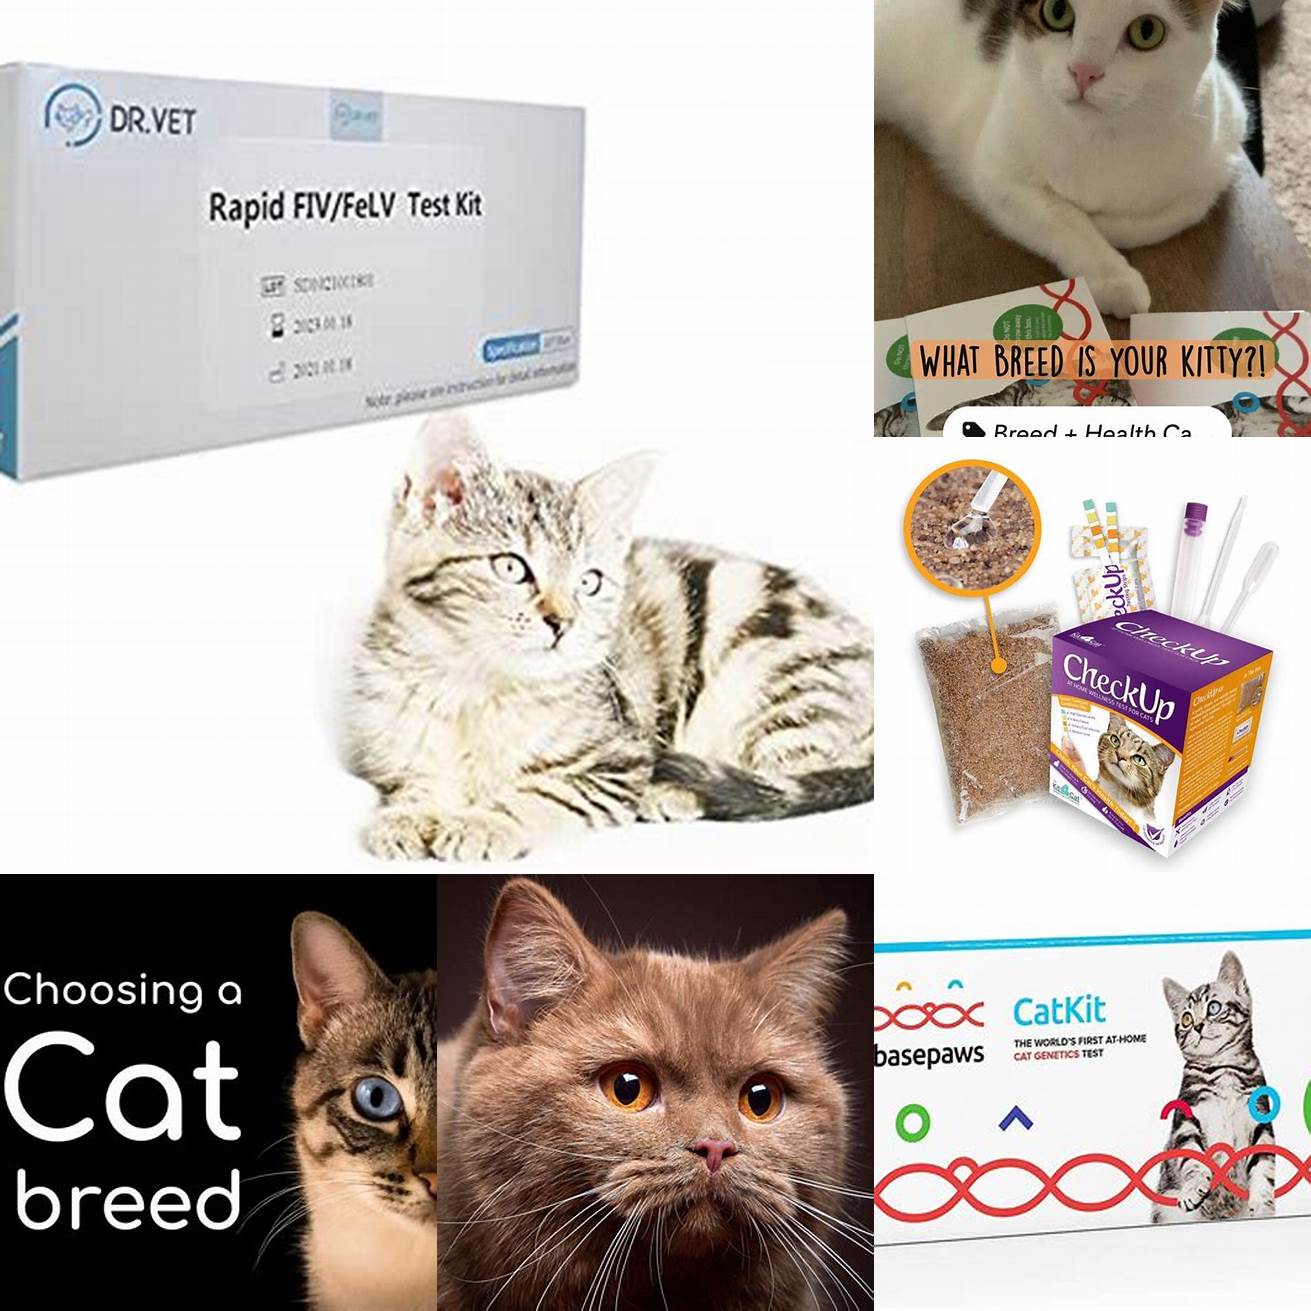 Choose a reputable brand Choose a cat breed test kit from a reputable brand to ensure accuracy and quality